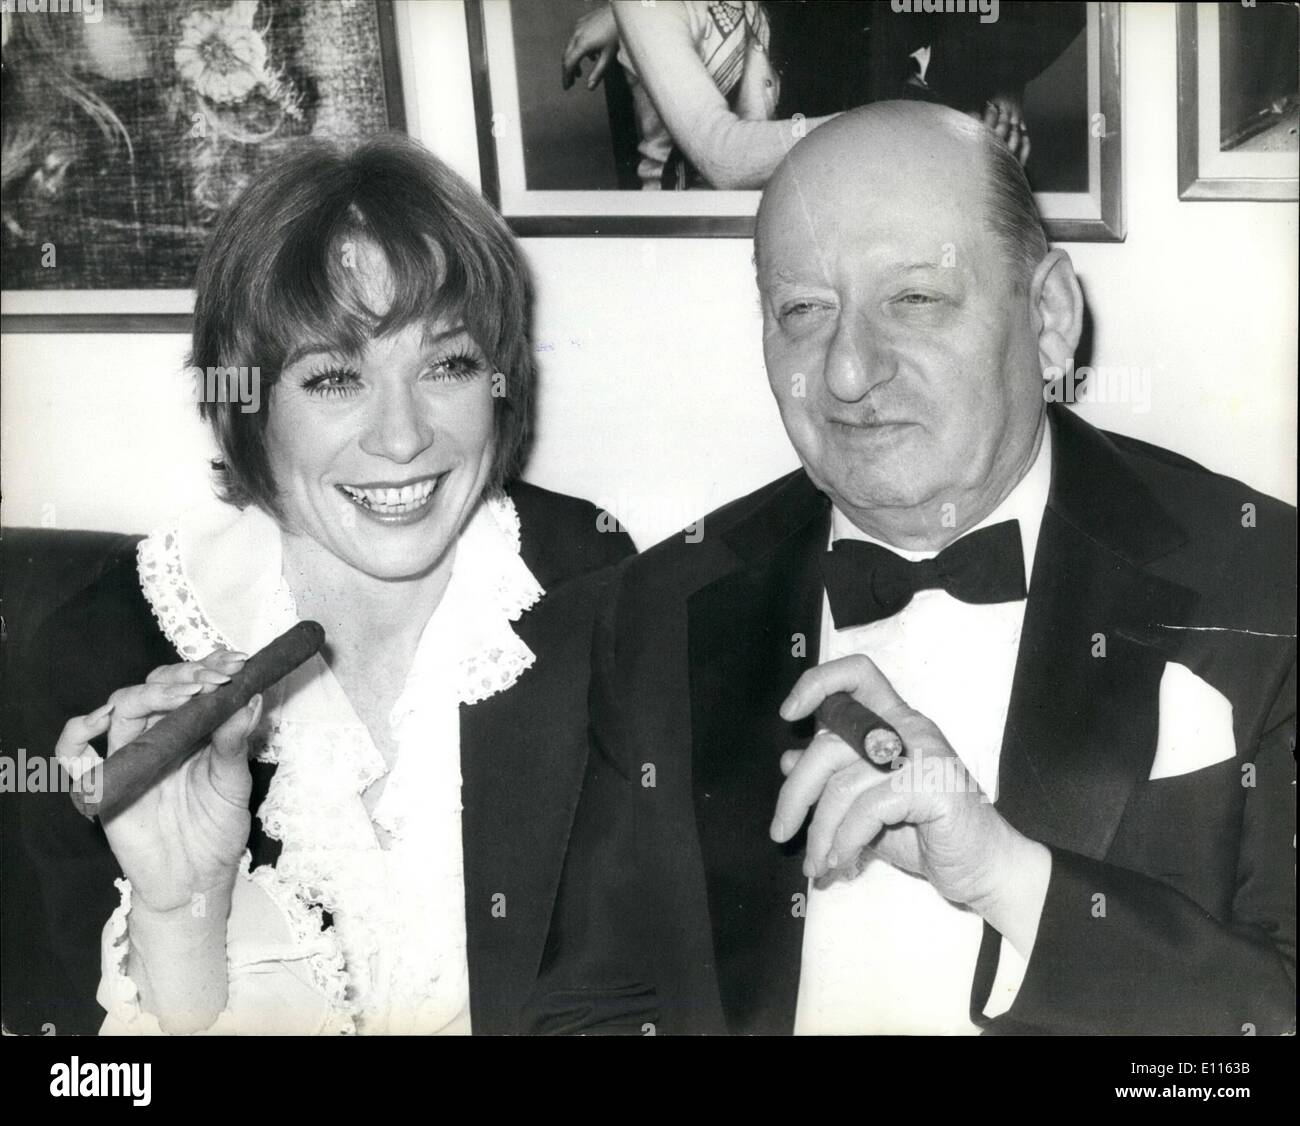 Feb. 02, 1976 - Exultant Triumph For Shirley MacLaine In Her London Stage Debut: Last night was a night of great triumph for the dazzling Shirley MacLaine after her smashhit stage debut at the London Palladium. The theatre stalls were packed with Celebrities who stood and cheered at the end of her show. Following her first night success Shirley went on to a party at Mr. Chow's in Kinghtsbridge. Picture Shows: Superstar Shirley MacLaine joins Sir Lew Grade in smoking a large cigar when she attended the Party after her successful London stage debut last night. Stock Photo